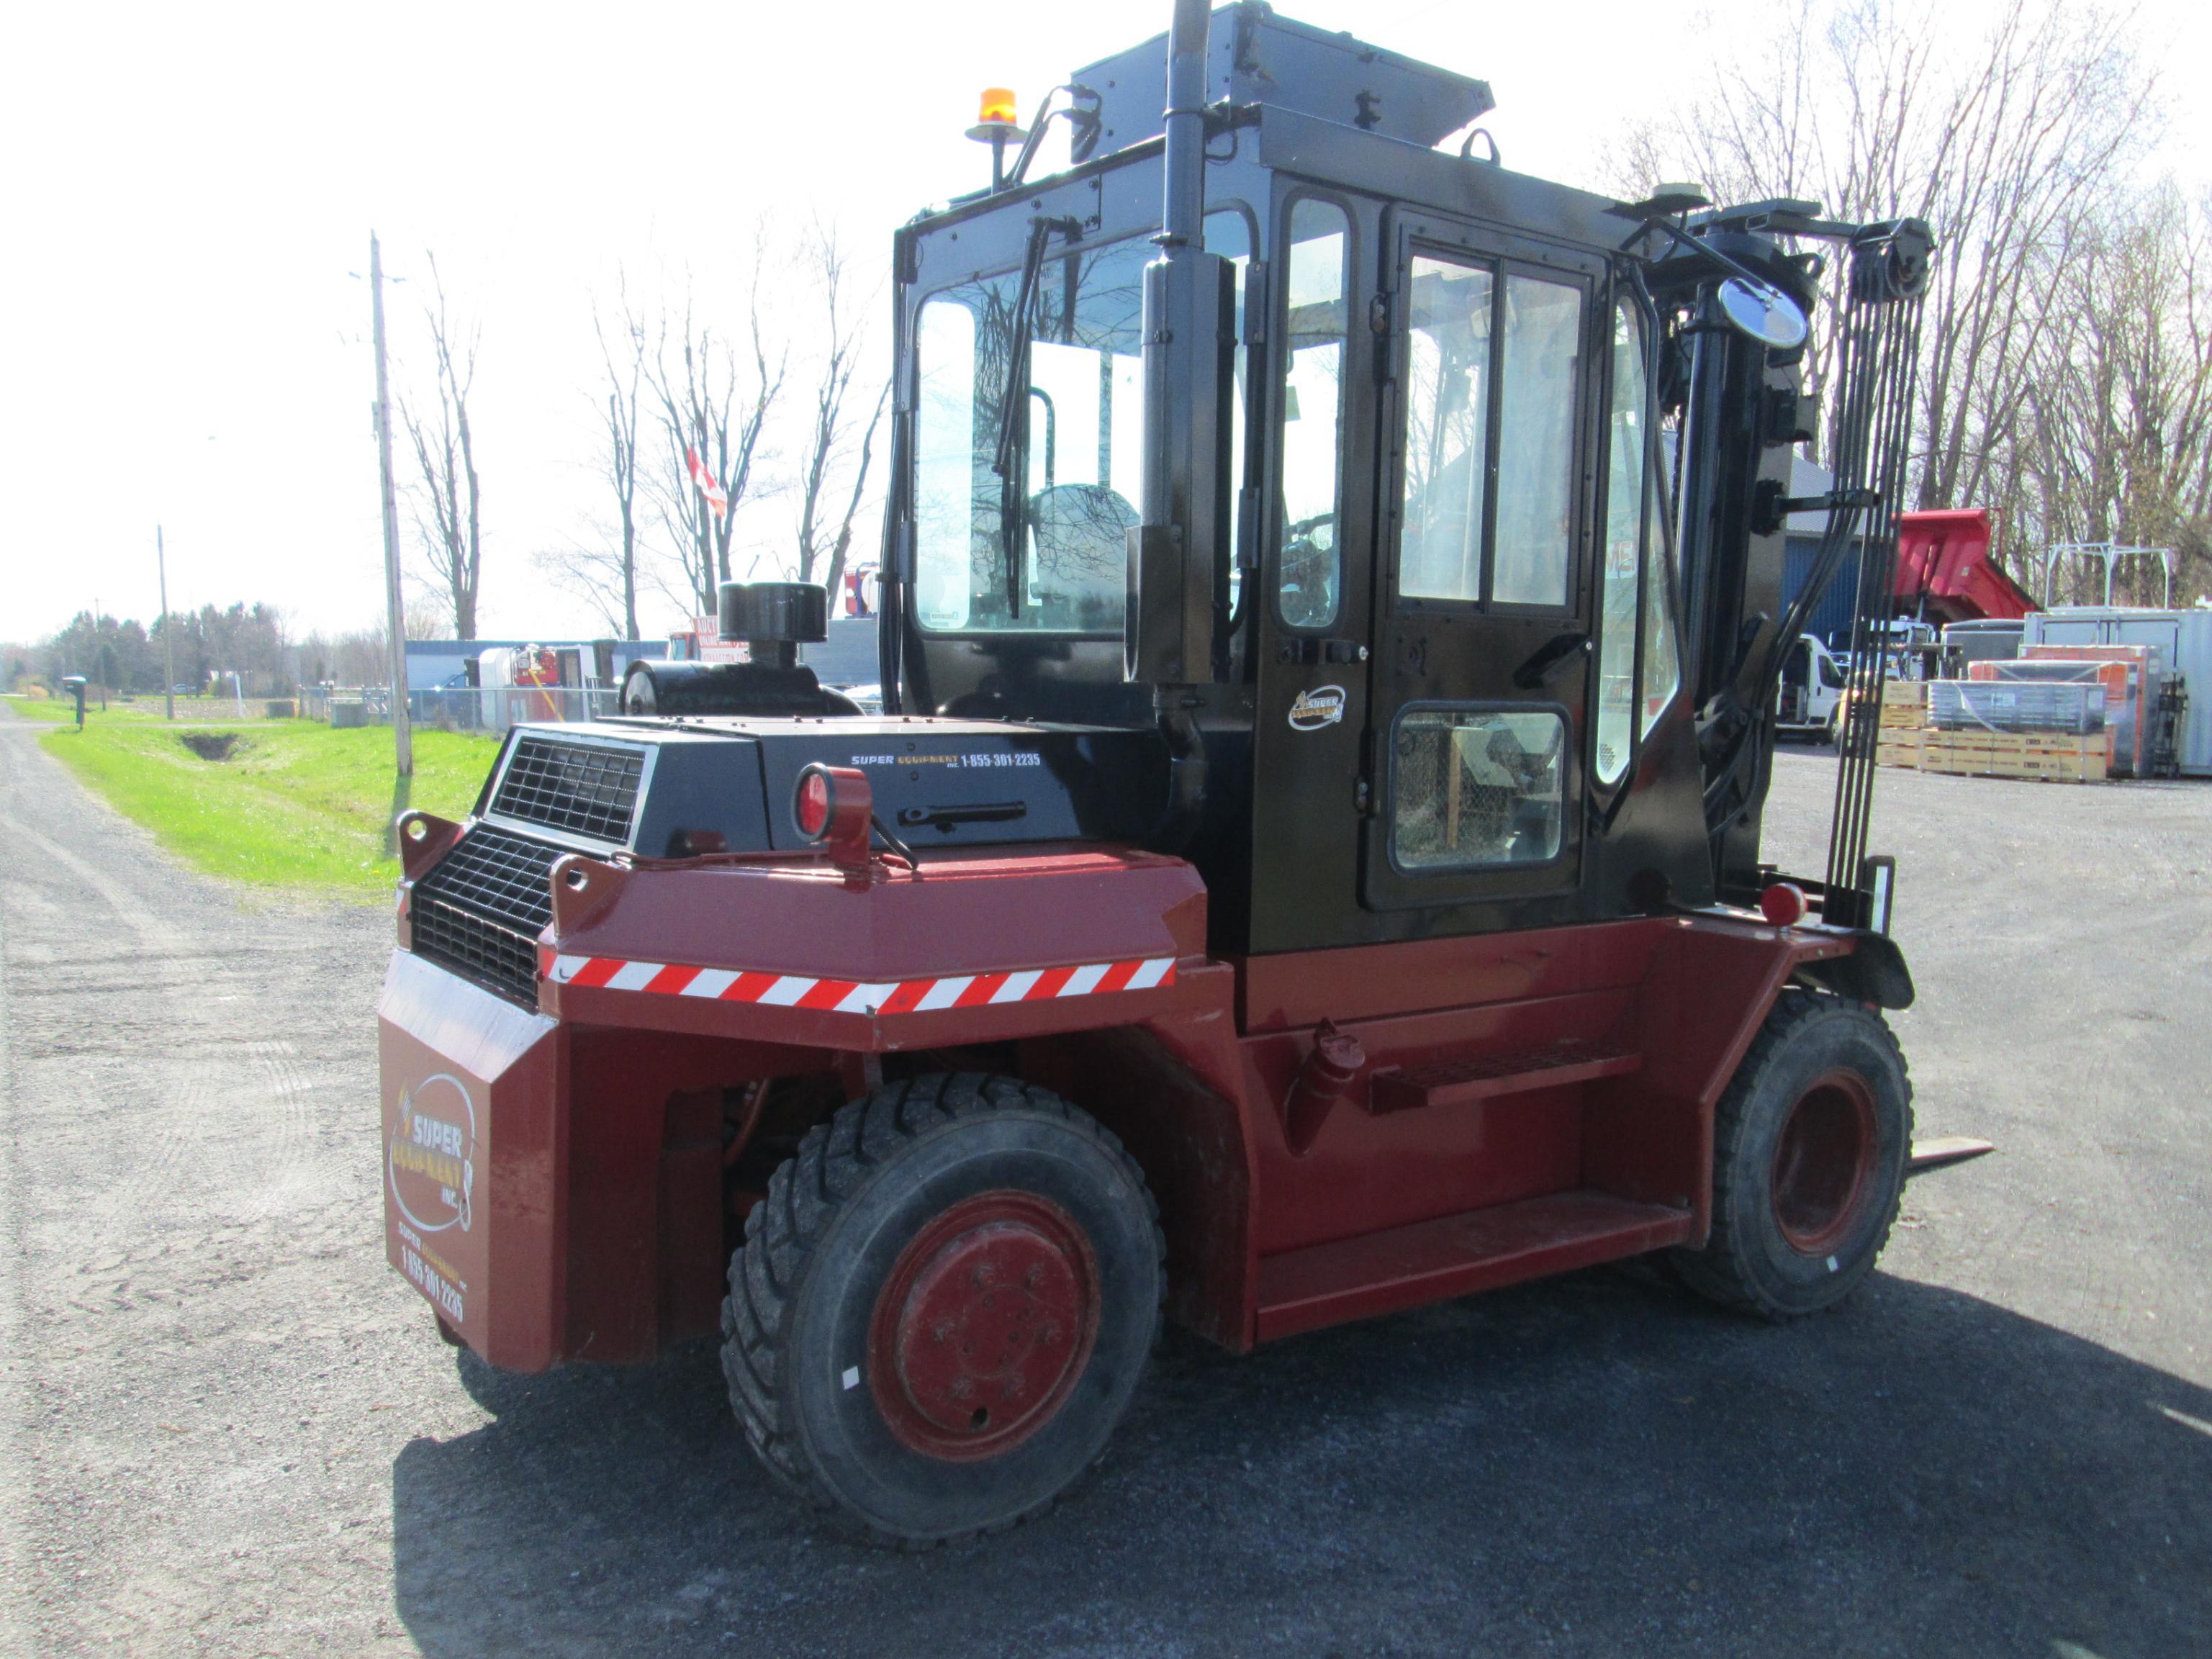 FORKLIFT Taylor THD160 FORKLIFT SN 833190 powered by Cummins B4.5T diesel engine, equipped with cab,